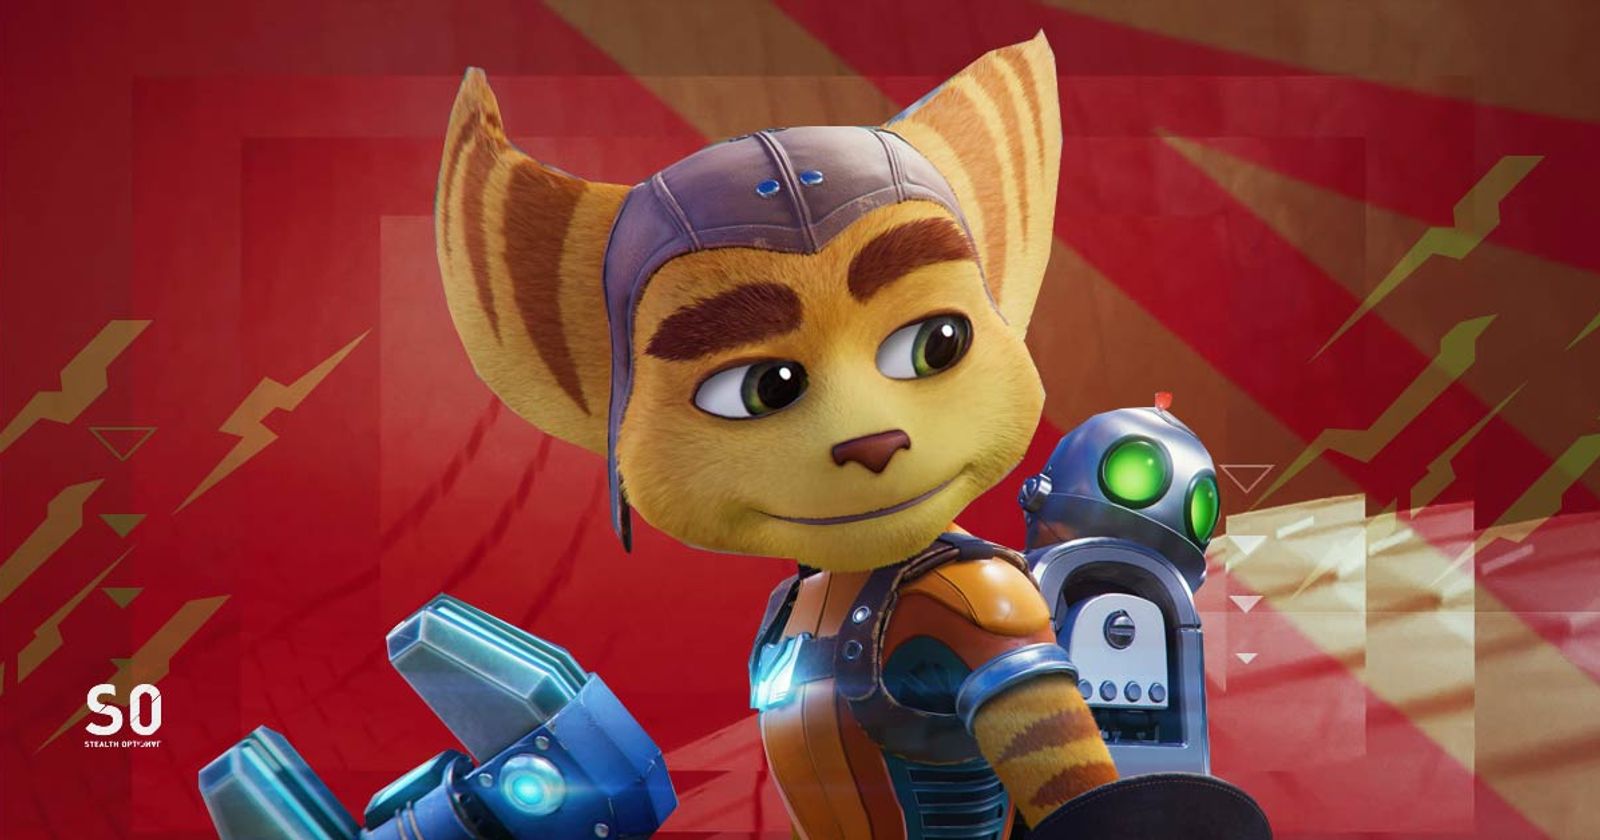 metacritic on X: With 92 pro critic reviews lodged so far, Ratchet & Clank:  Rift Apart (PS5) is sitting on a Metascore of 89:   At its core, it's still your trusty